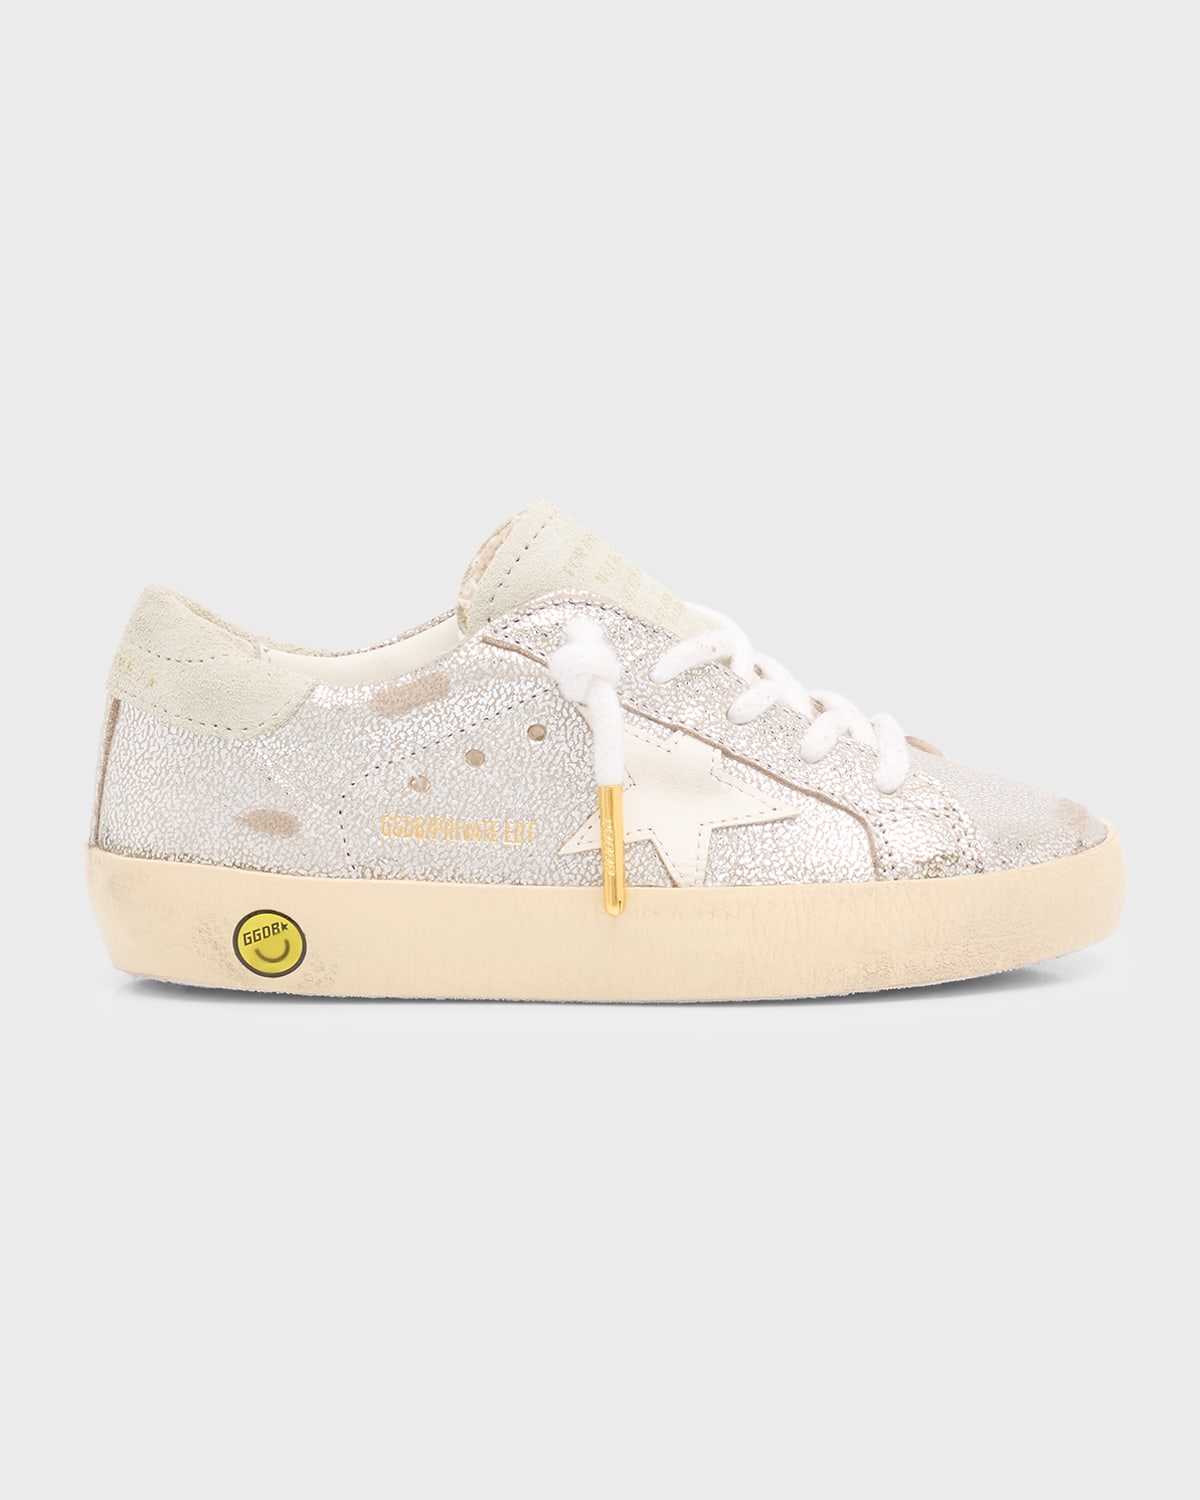 Golden Goose Girl's Superstar Lace Up Micro Crackle Sneakers, Kids In Silver White